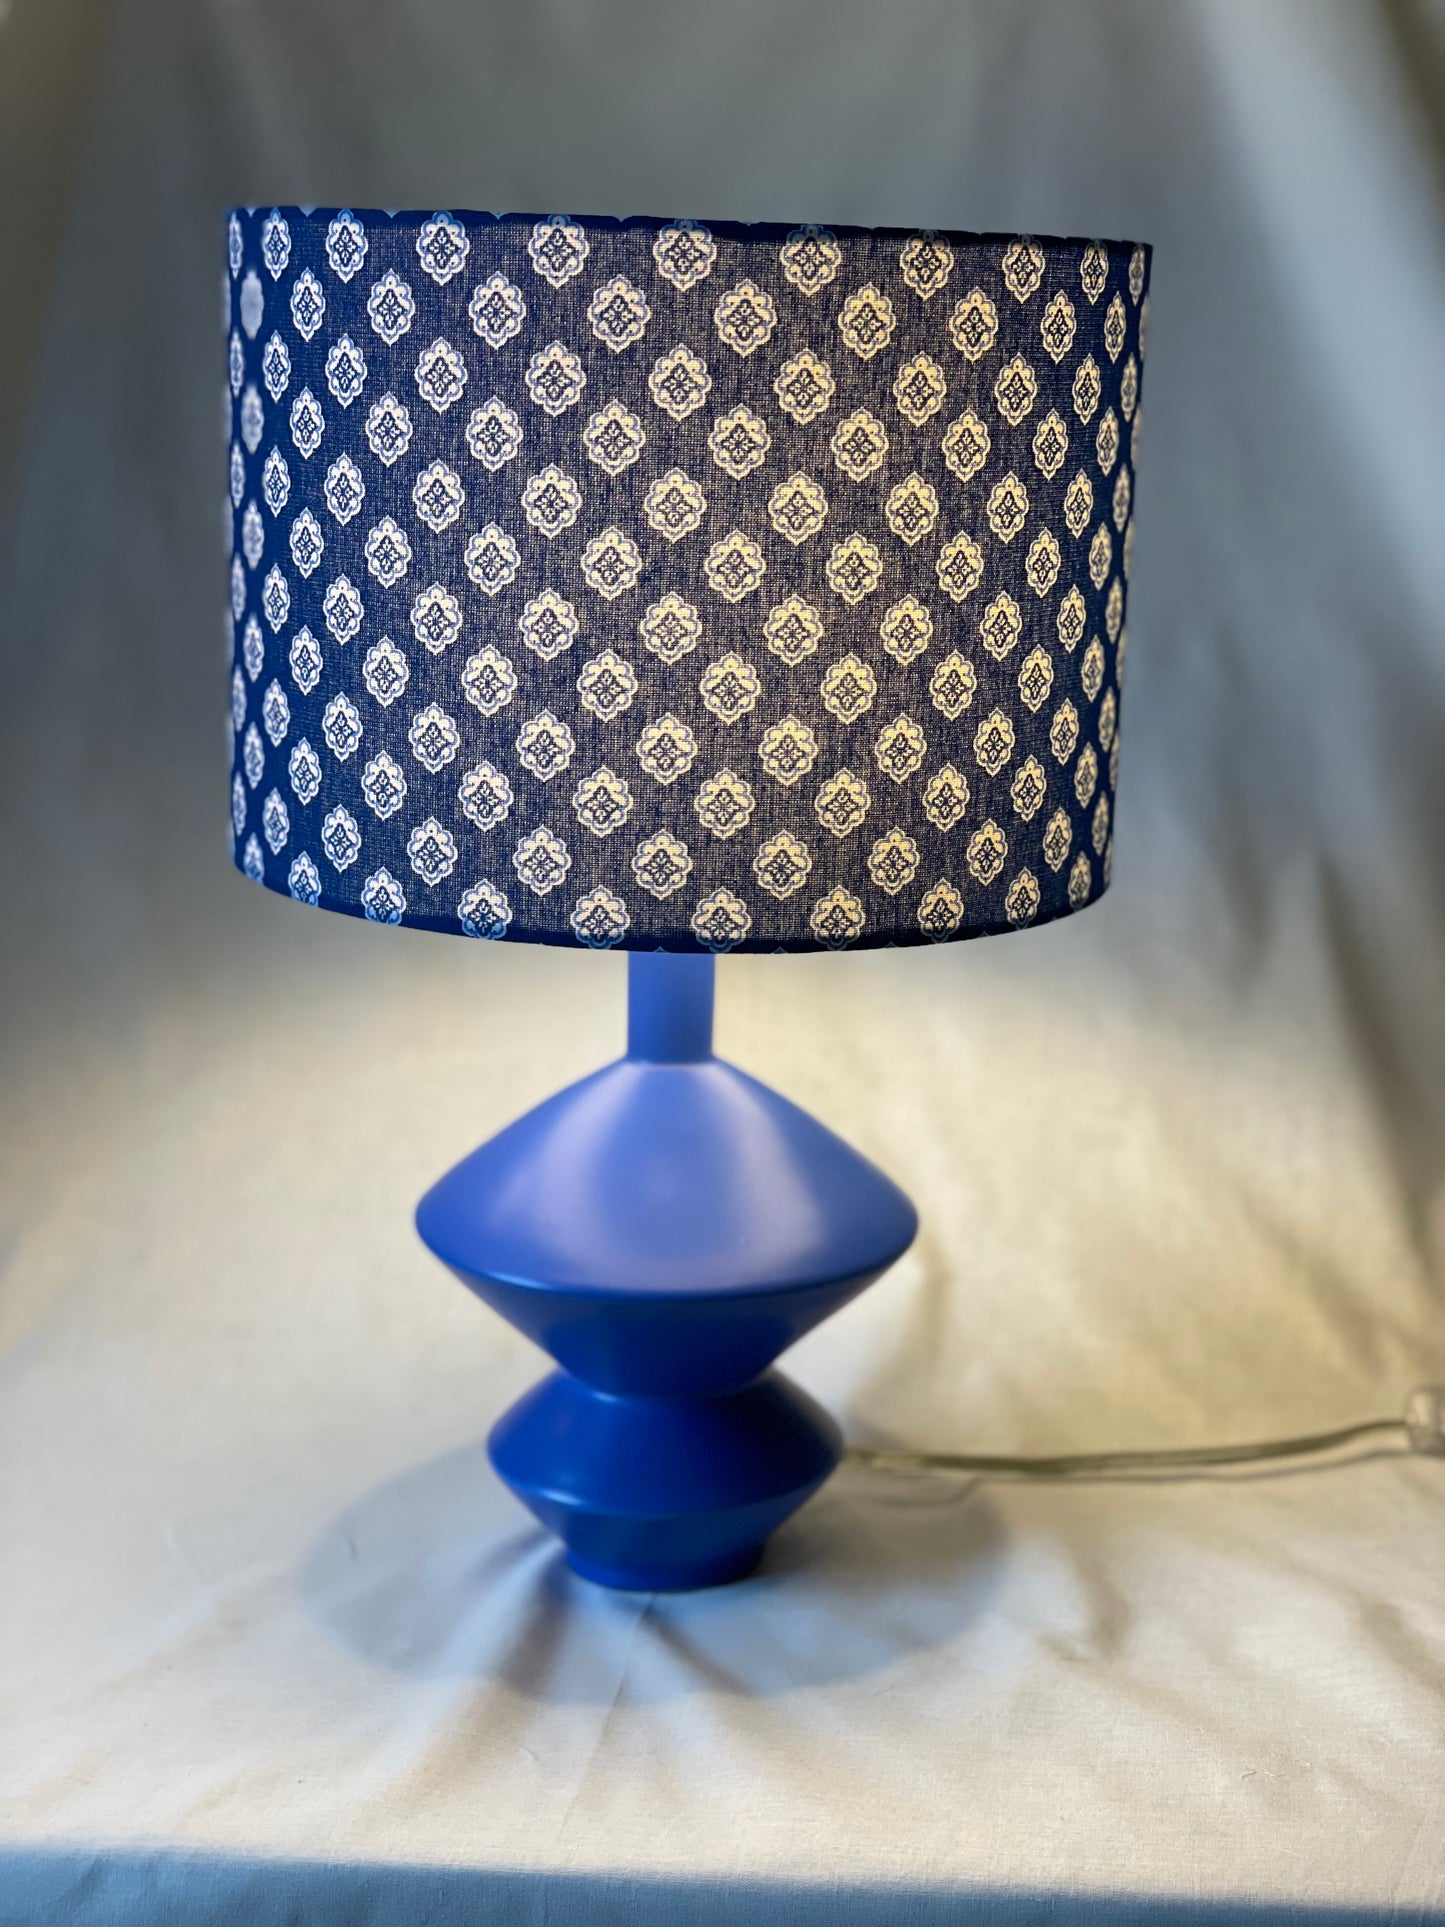 10 inch Drum Lampshade. French Jacquard. "Antibes" Blue and White.